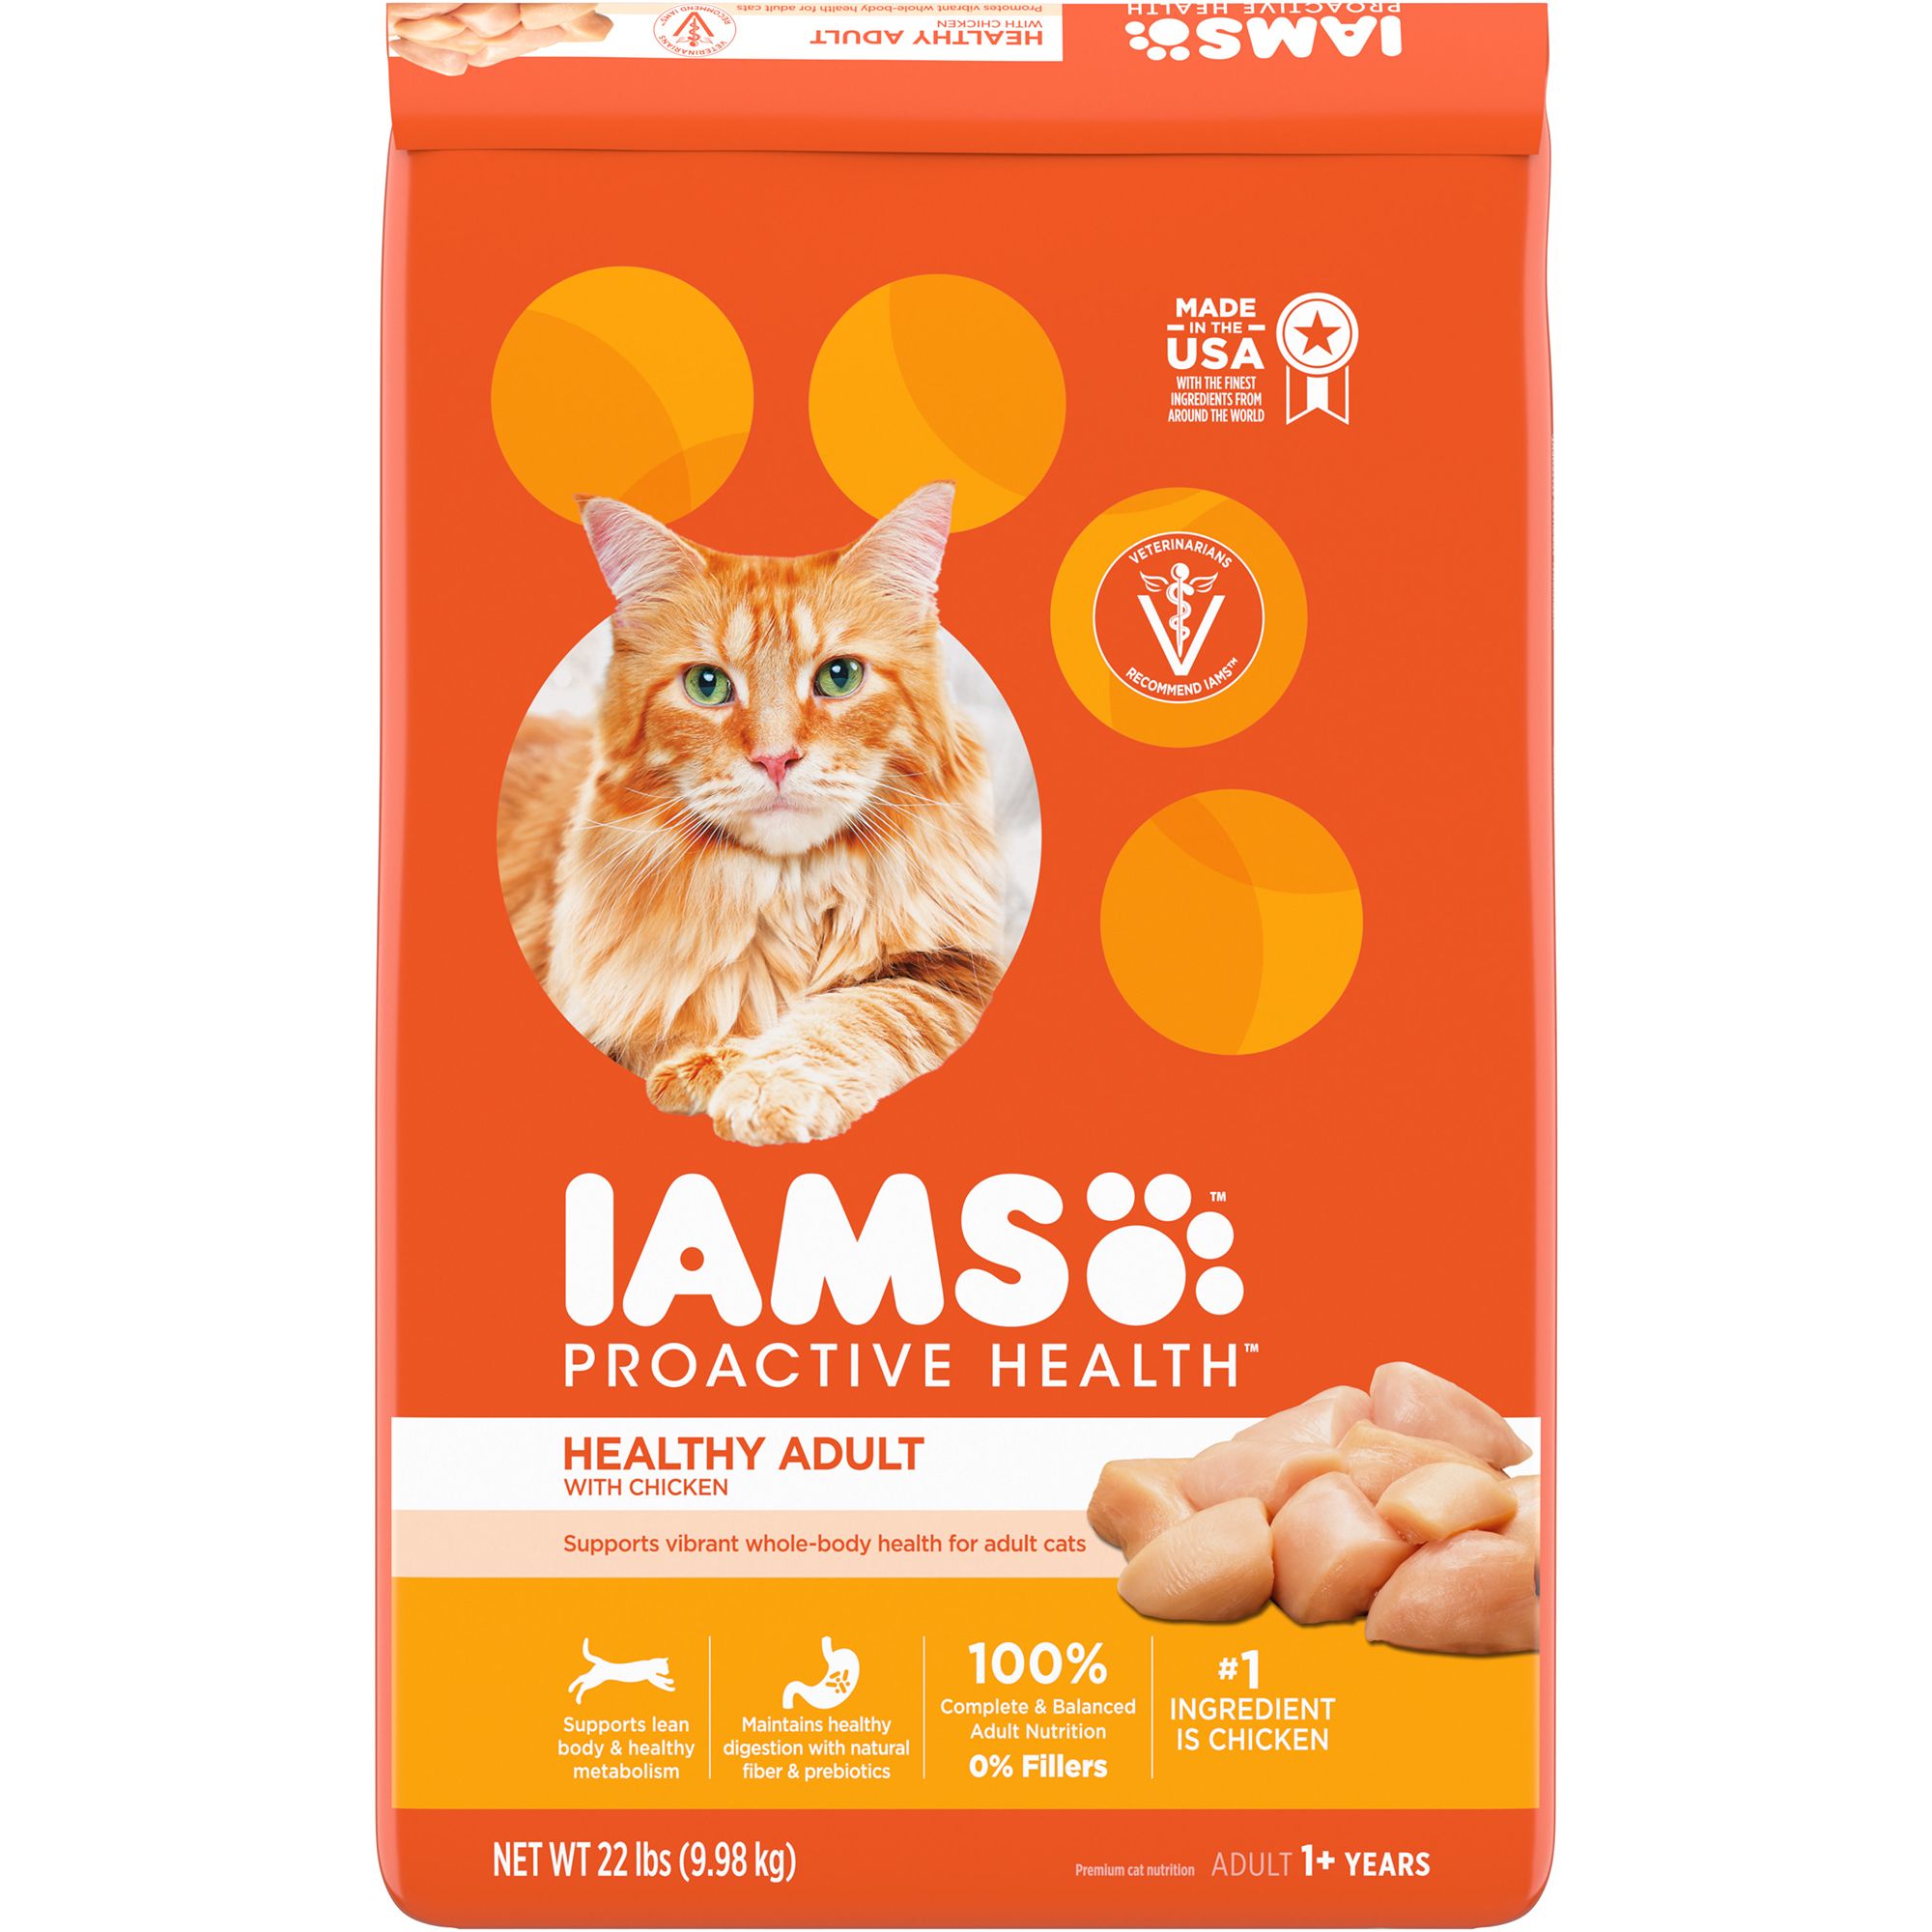 cheapest place to buy iams cat food